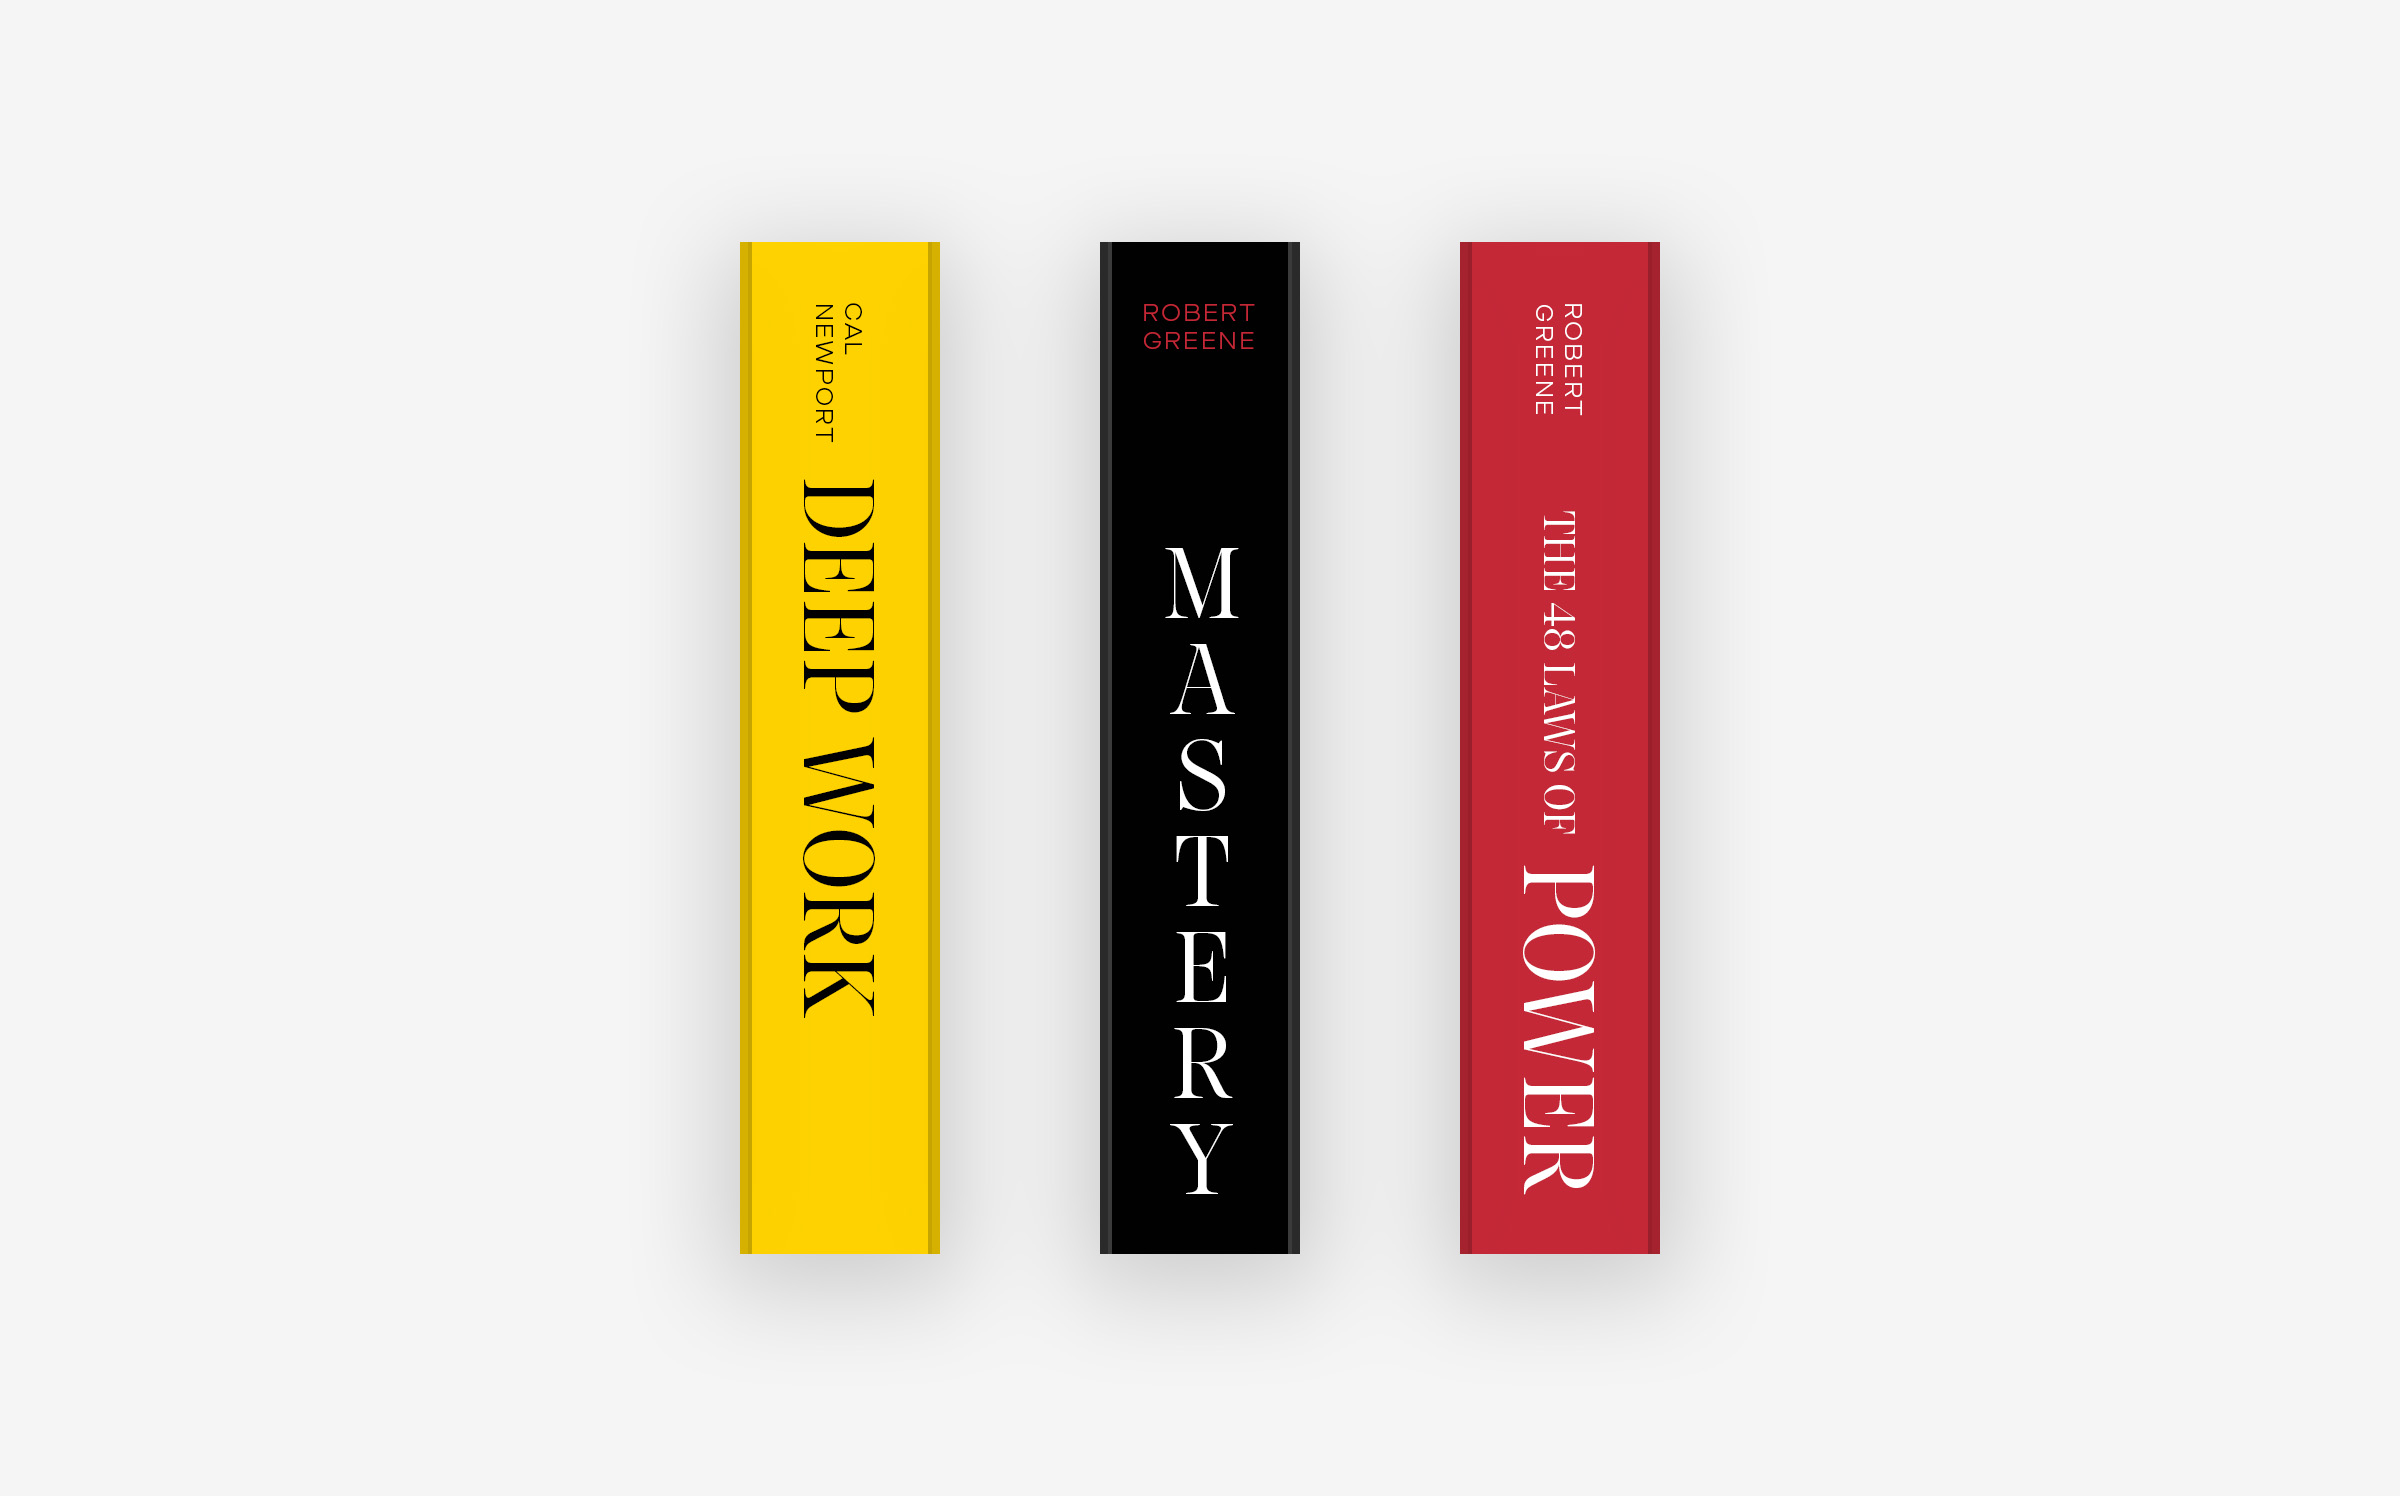 book-covers@2x